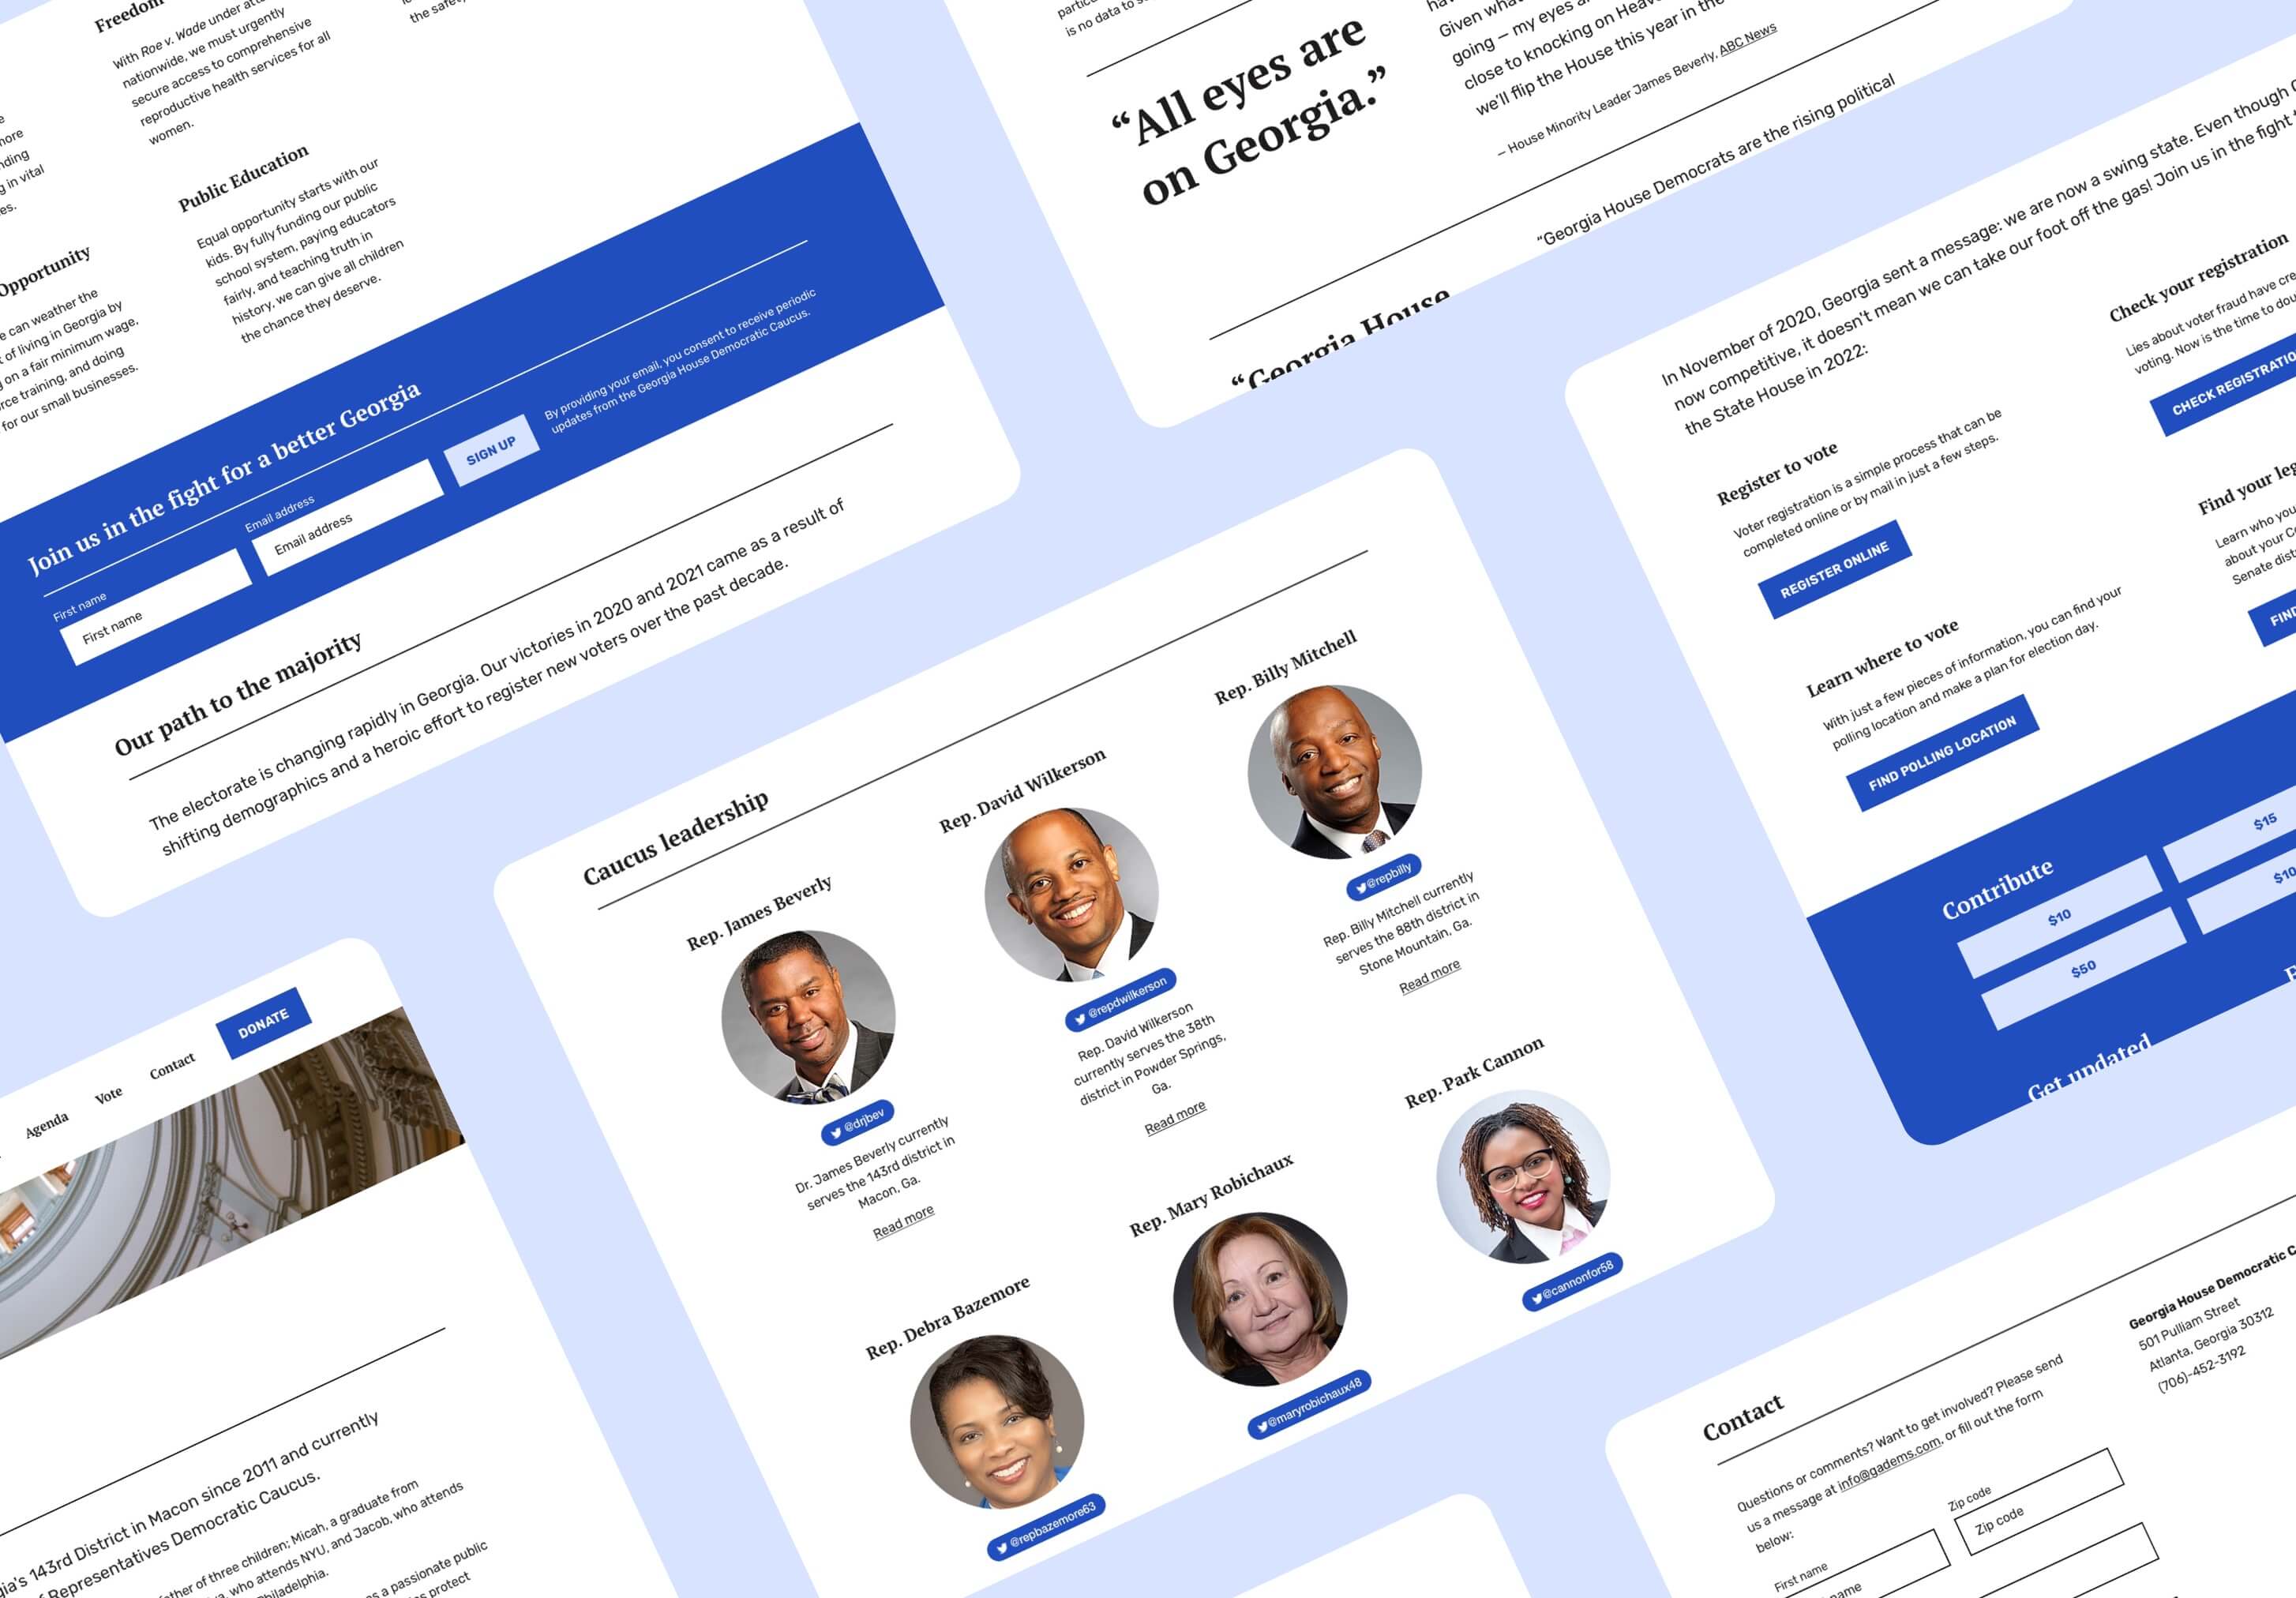 Different screenshots of the newly-designed website, including Caucus leadership, a contact form, agenda section, and more.